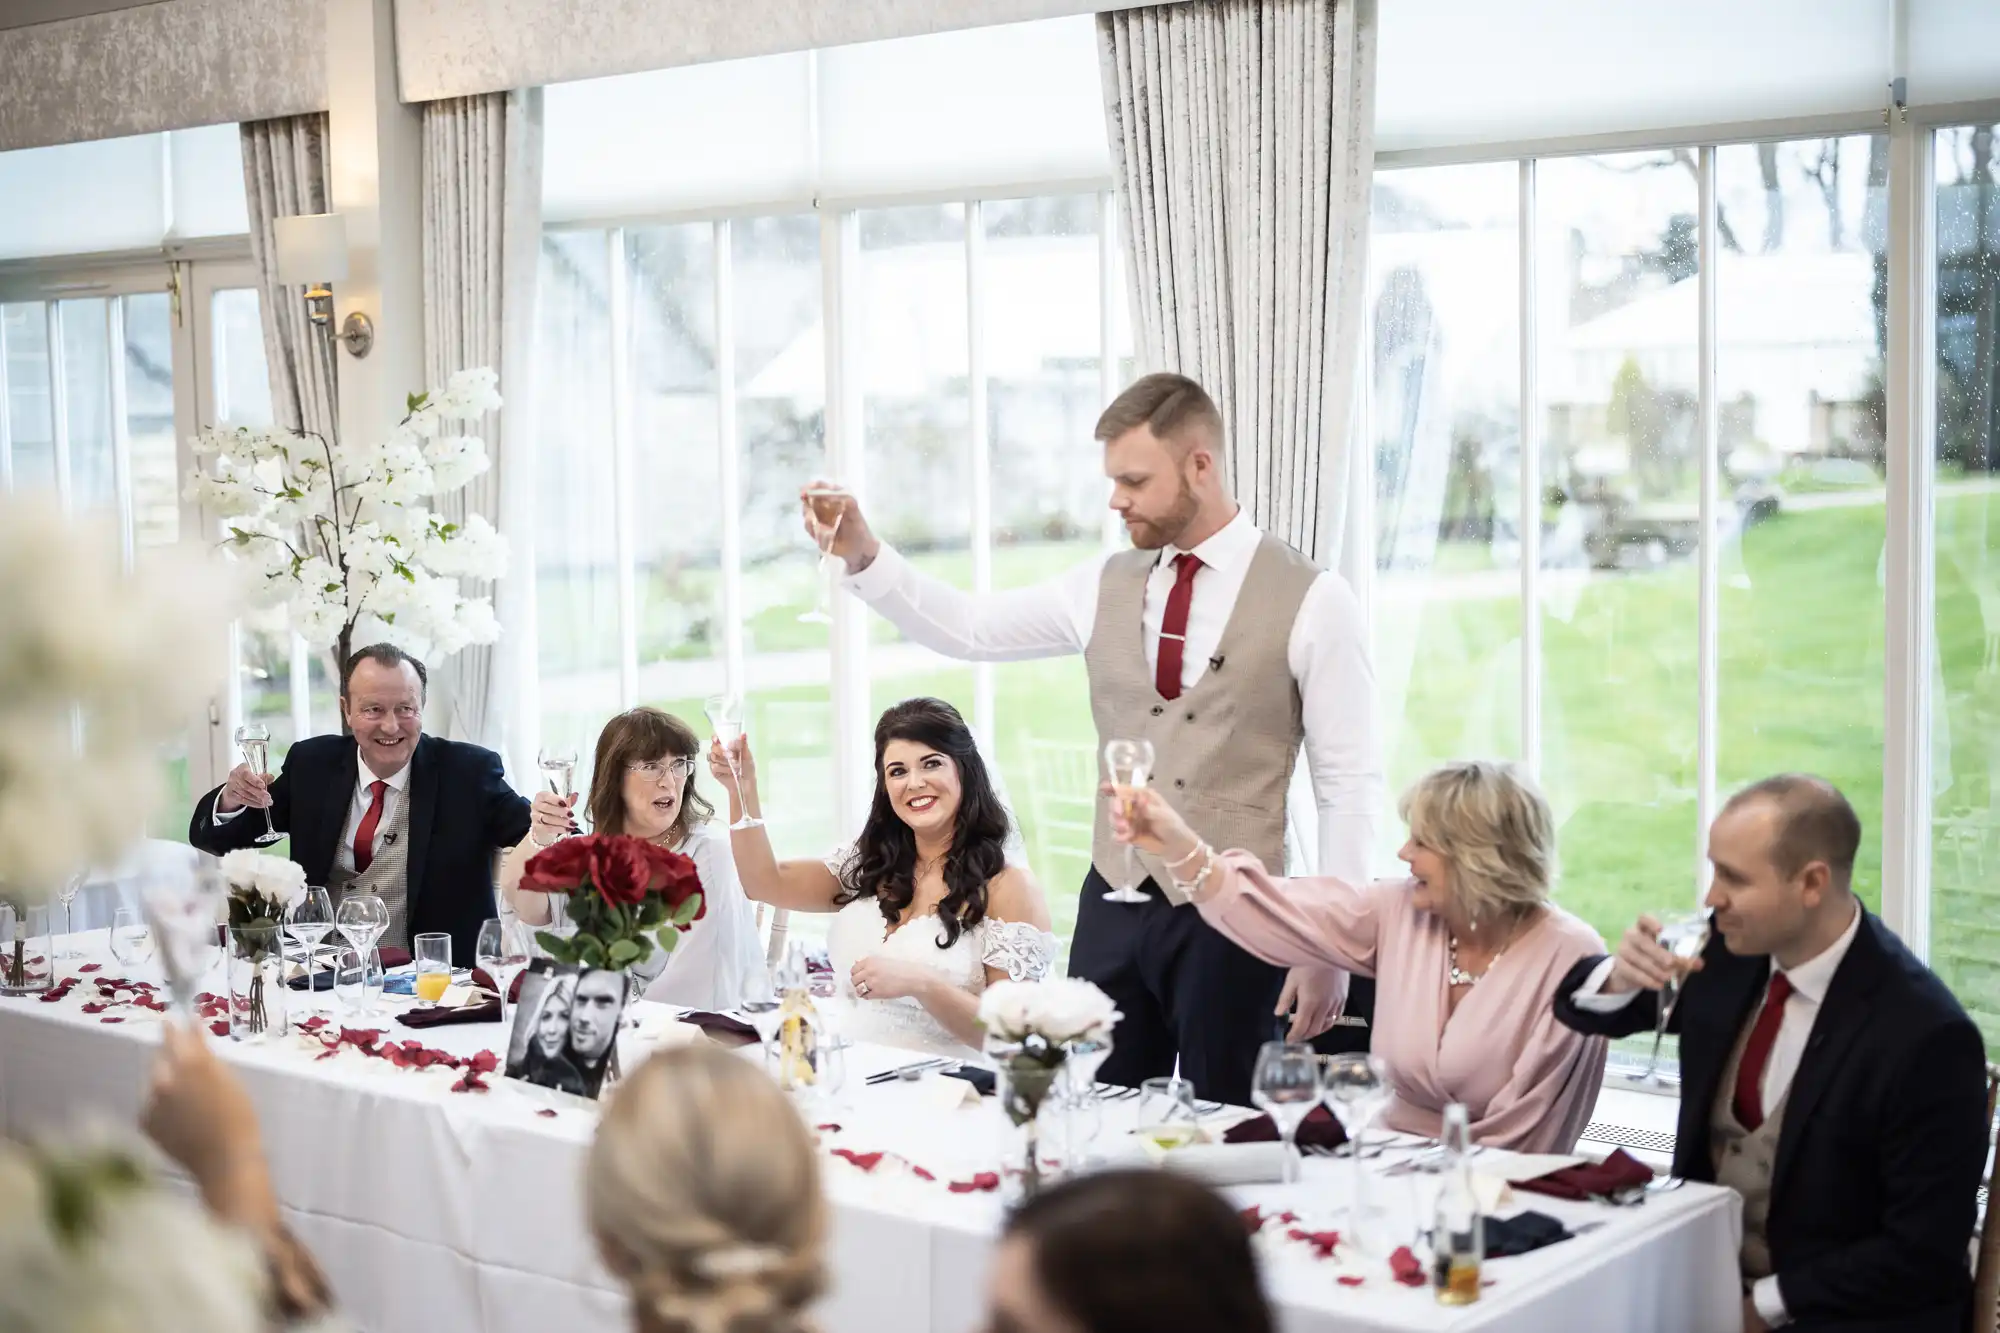 A wedding reception scene with six people seated at a long table. The bride and groom, along with the guests, are raising their glasses in a toast.